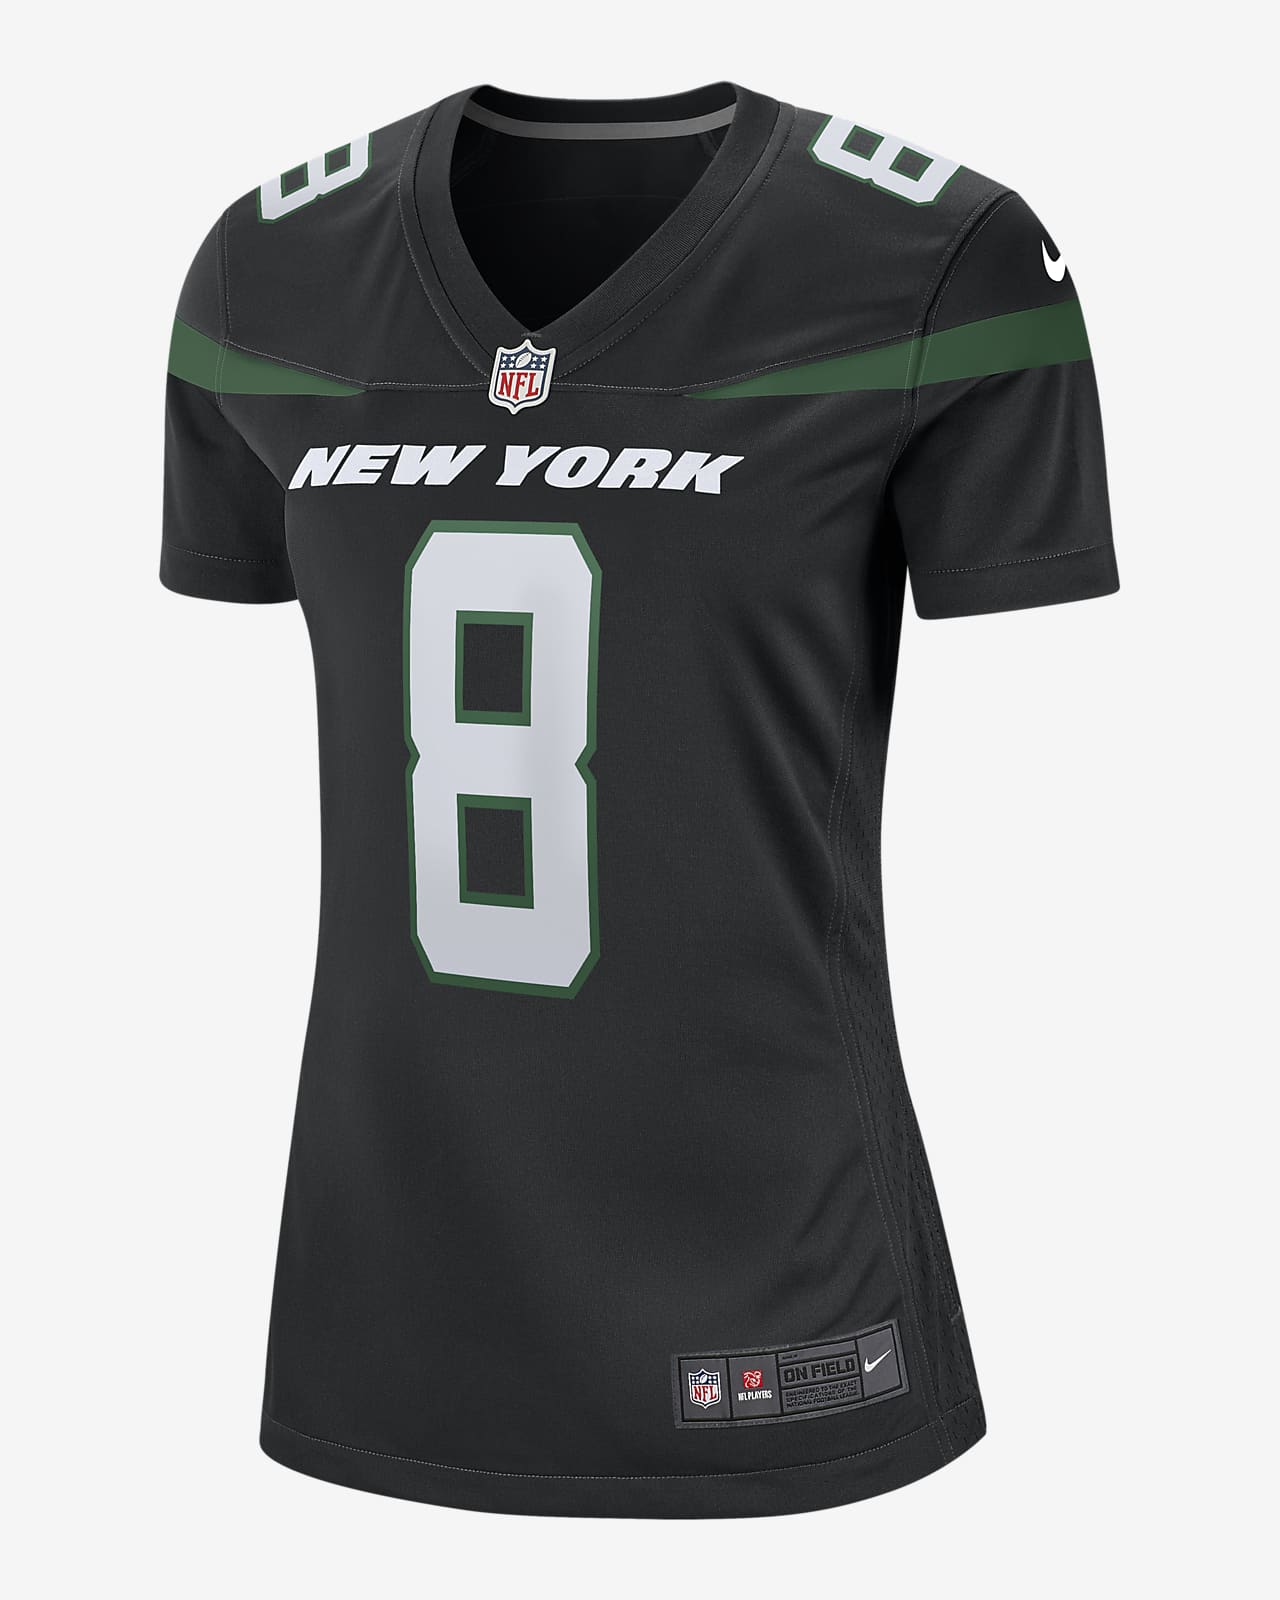 Aaron Rodgers New York Jets Women's Nike NFL Game Football Jersey